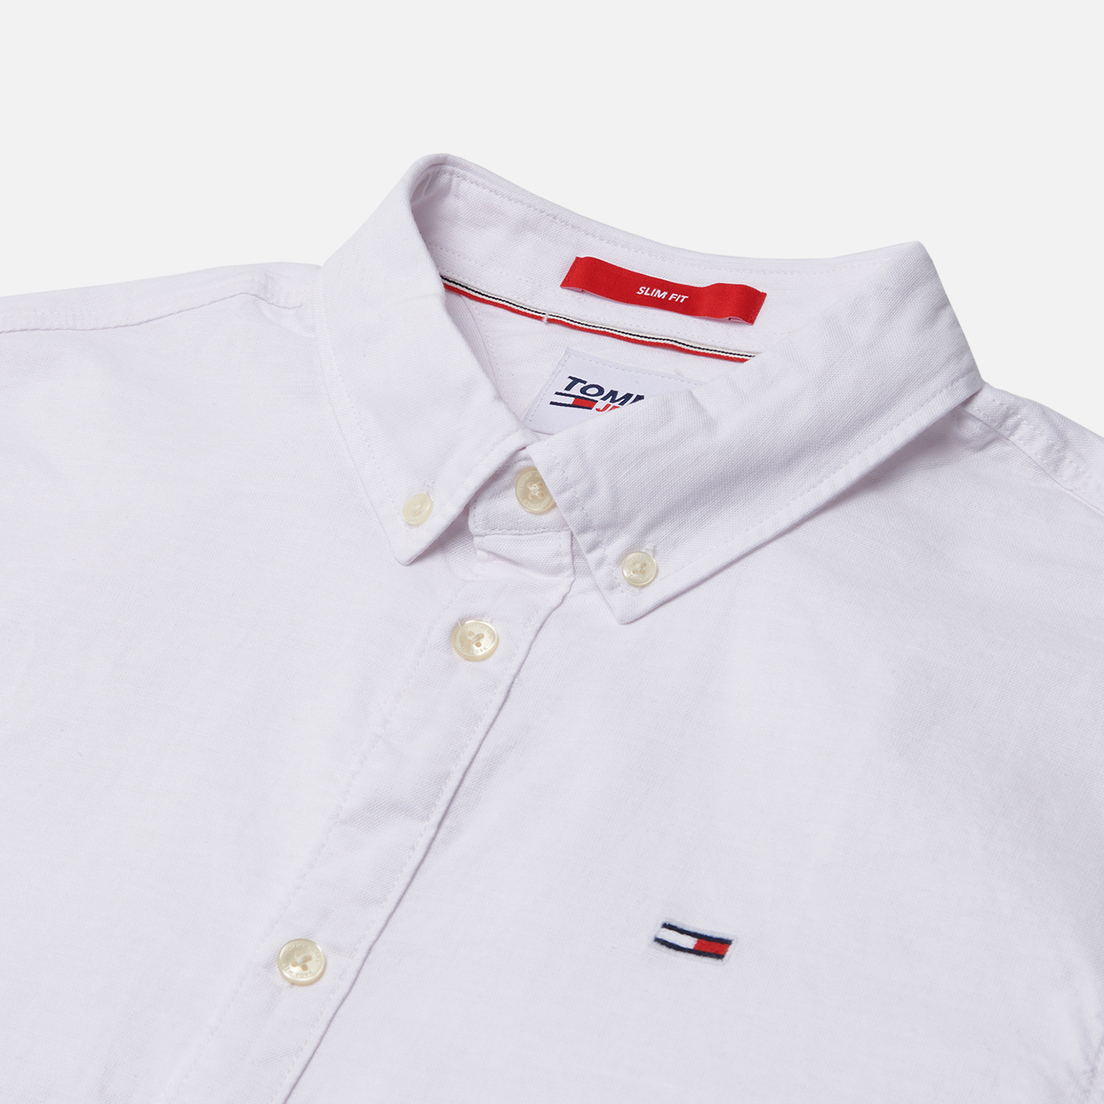 Tommy Jeans Мужская рубашка Stretch Oxford Cotton Slim Fit